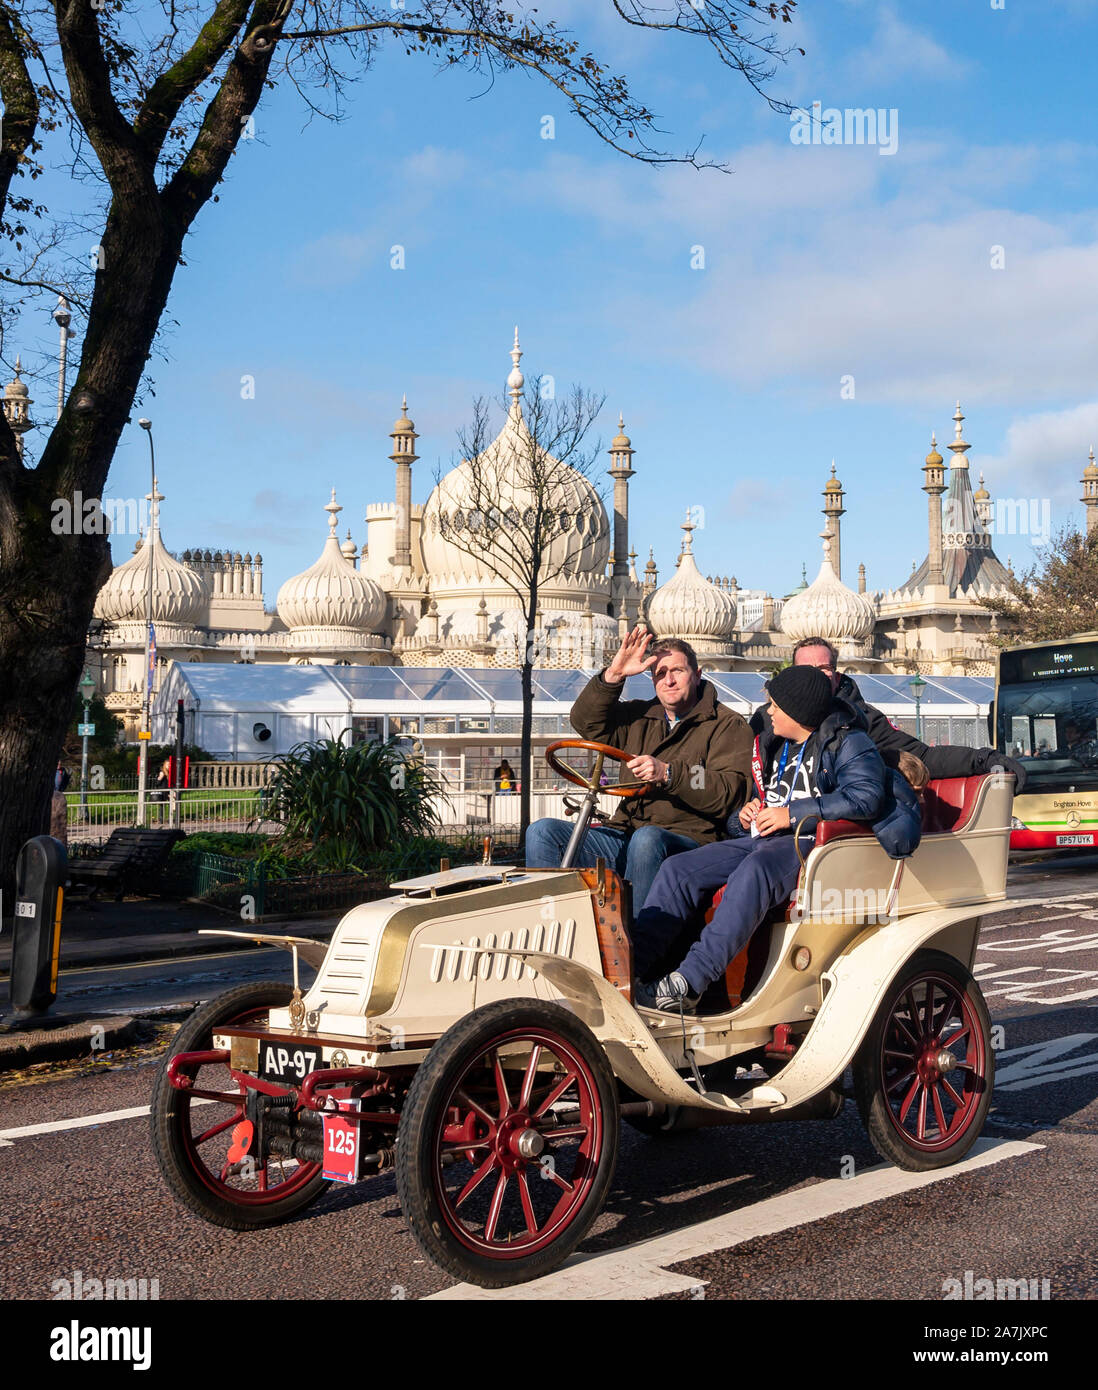 Brighton UK 3rd November 2019 - A 1902 Darracq owned and driven by Allan White passes by the Royal Pavilion in Brighton as they near the finish of the Bonhams London to Brighton Veteran Car Run. Over 400 pre-1905 cars set off from Hyde Park London early this morning and finish at Brighton's Madeira Drive on the seafront : Credit Simon Dack / Alamy Live News Stock Photo